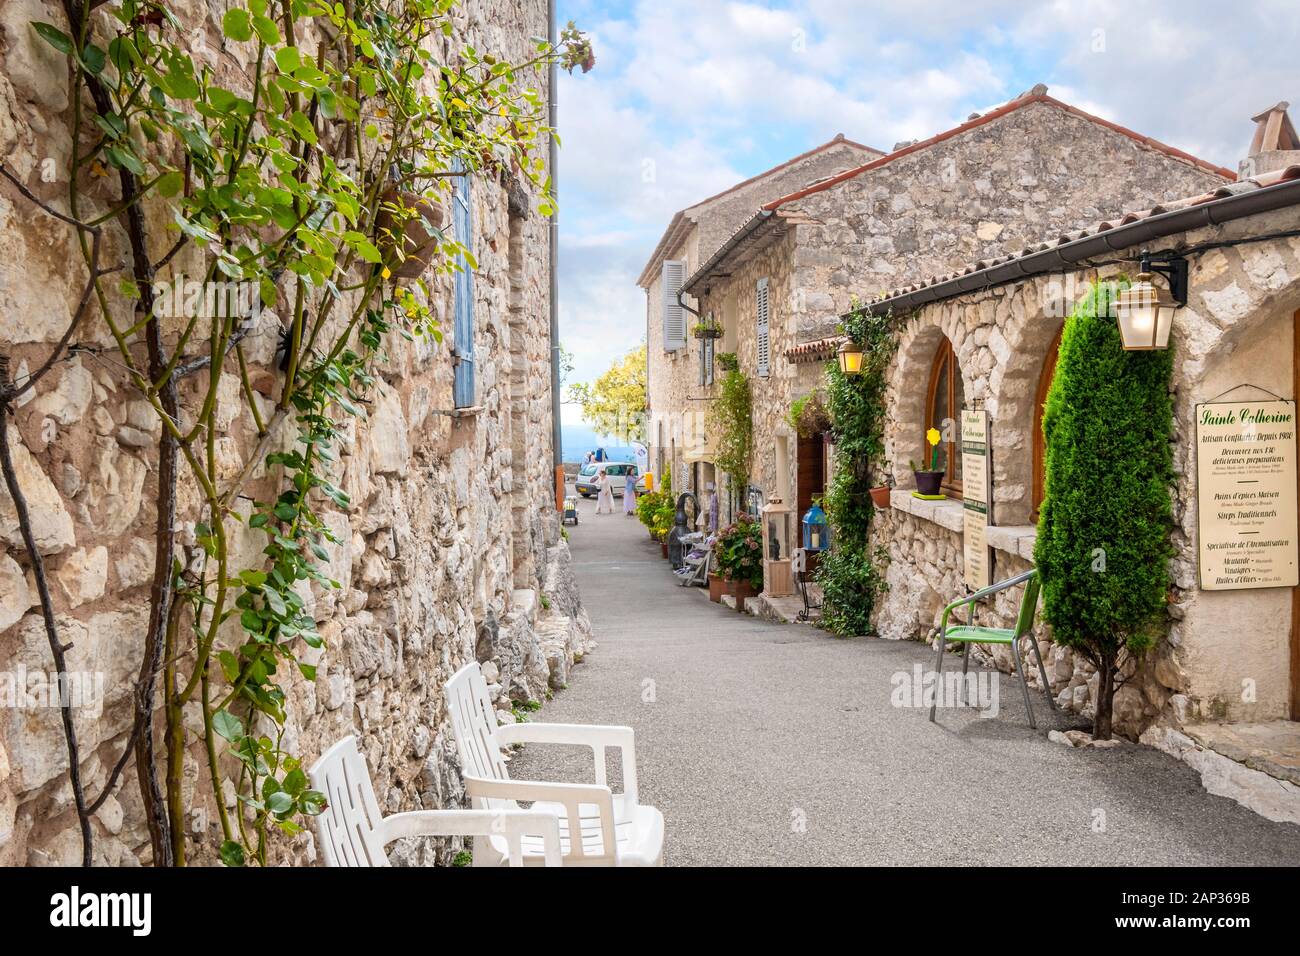 A typical quaint street of shops in the medieval hilltop village of Gourdon, France, in the Provence Alpes Maritimes area of Southern France. Stock Photo